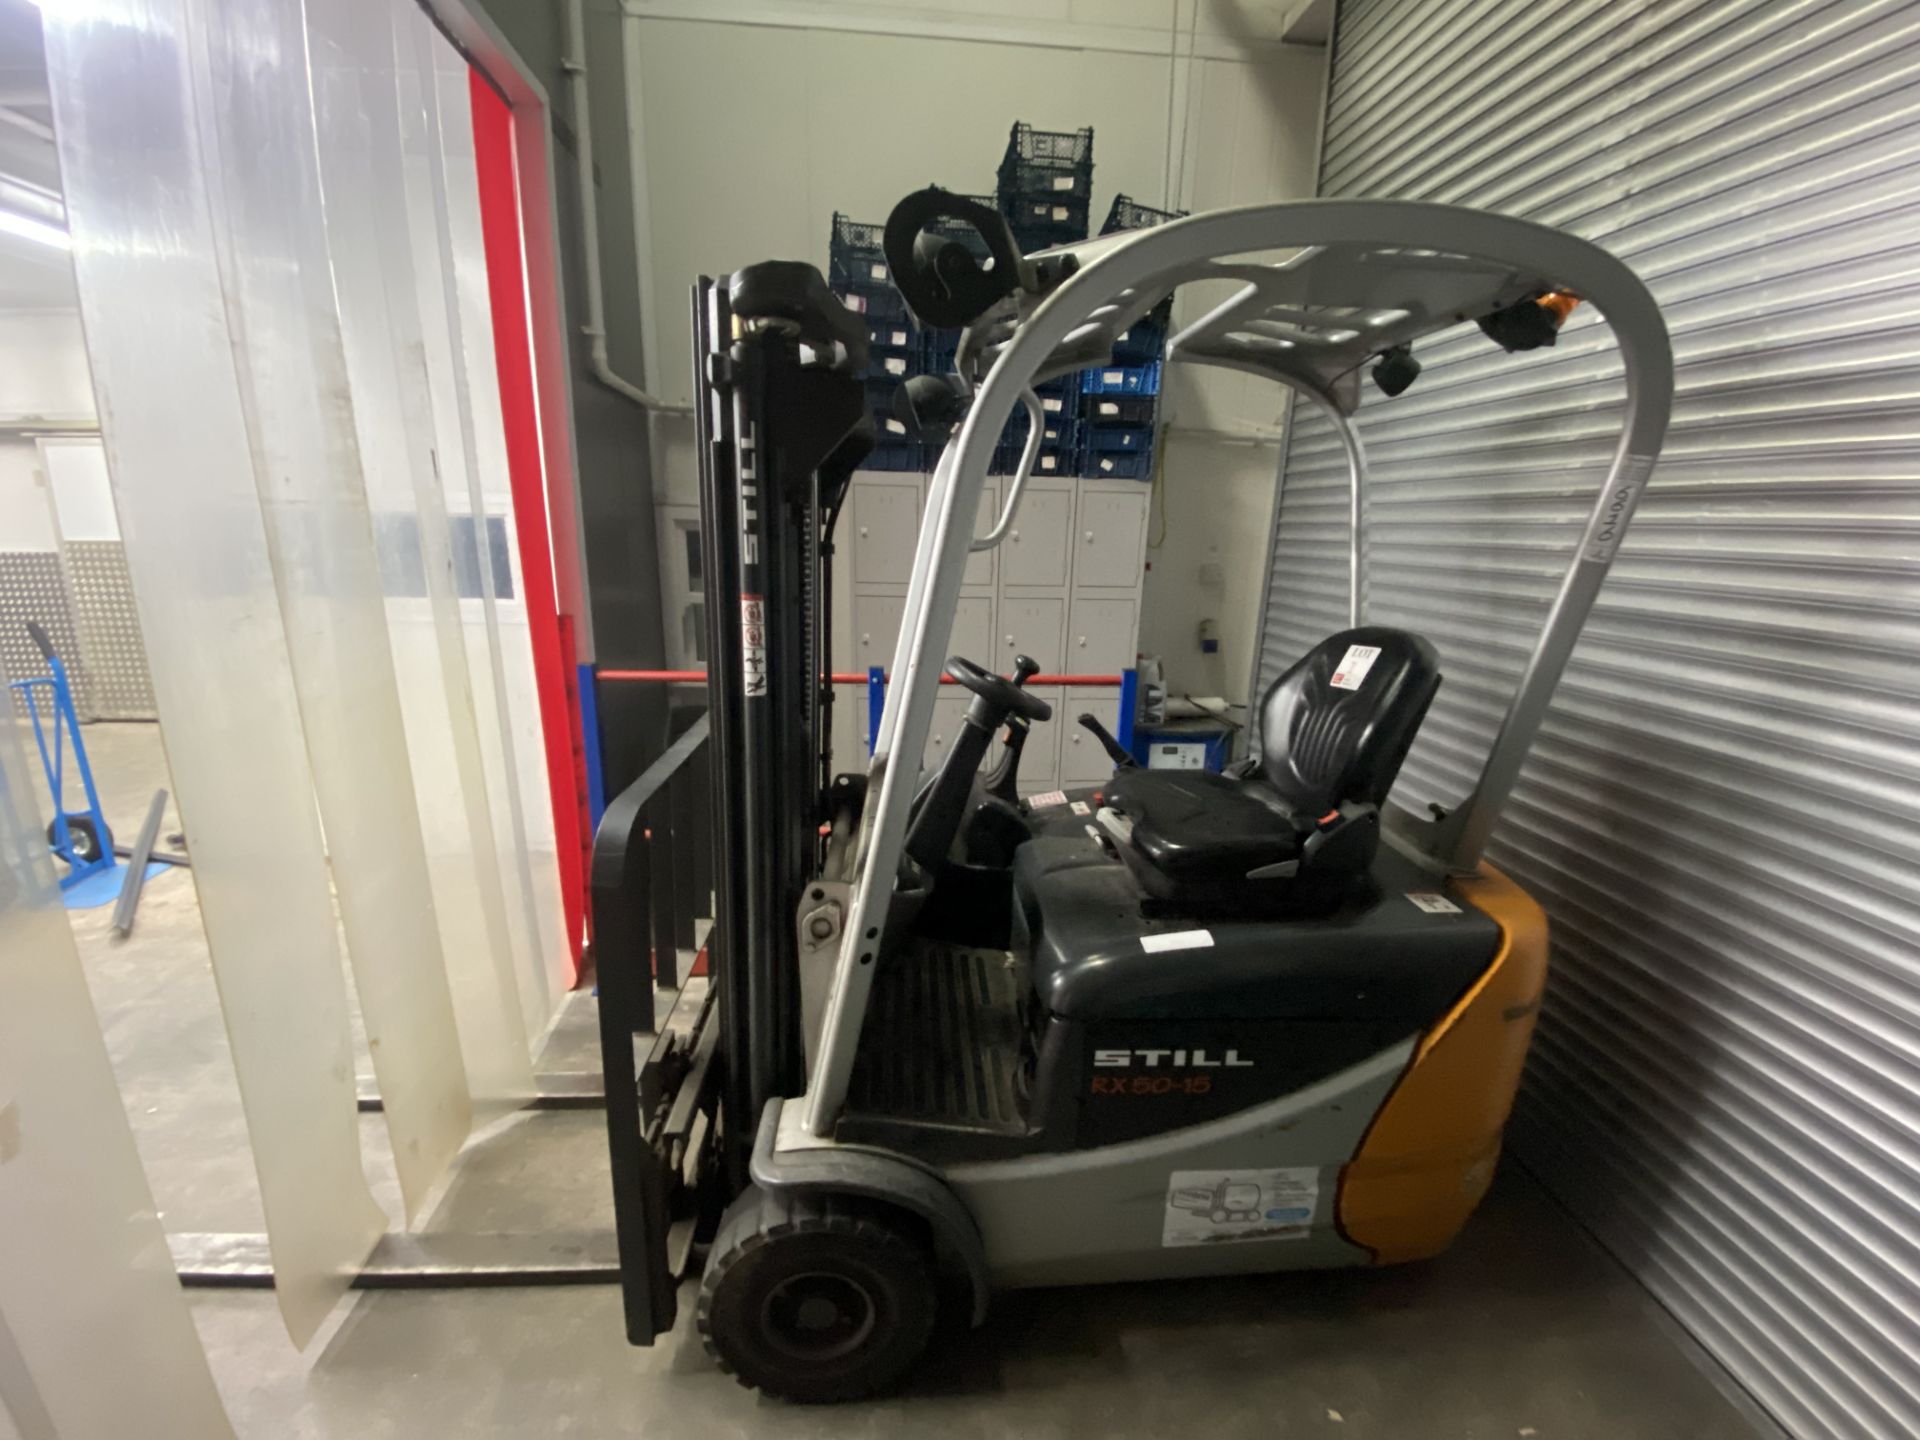 Still RX50-15 forklift, 1500kg capacity, Serial no. 525054A00295 with Curtis 24v 100 charger, (2010)